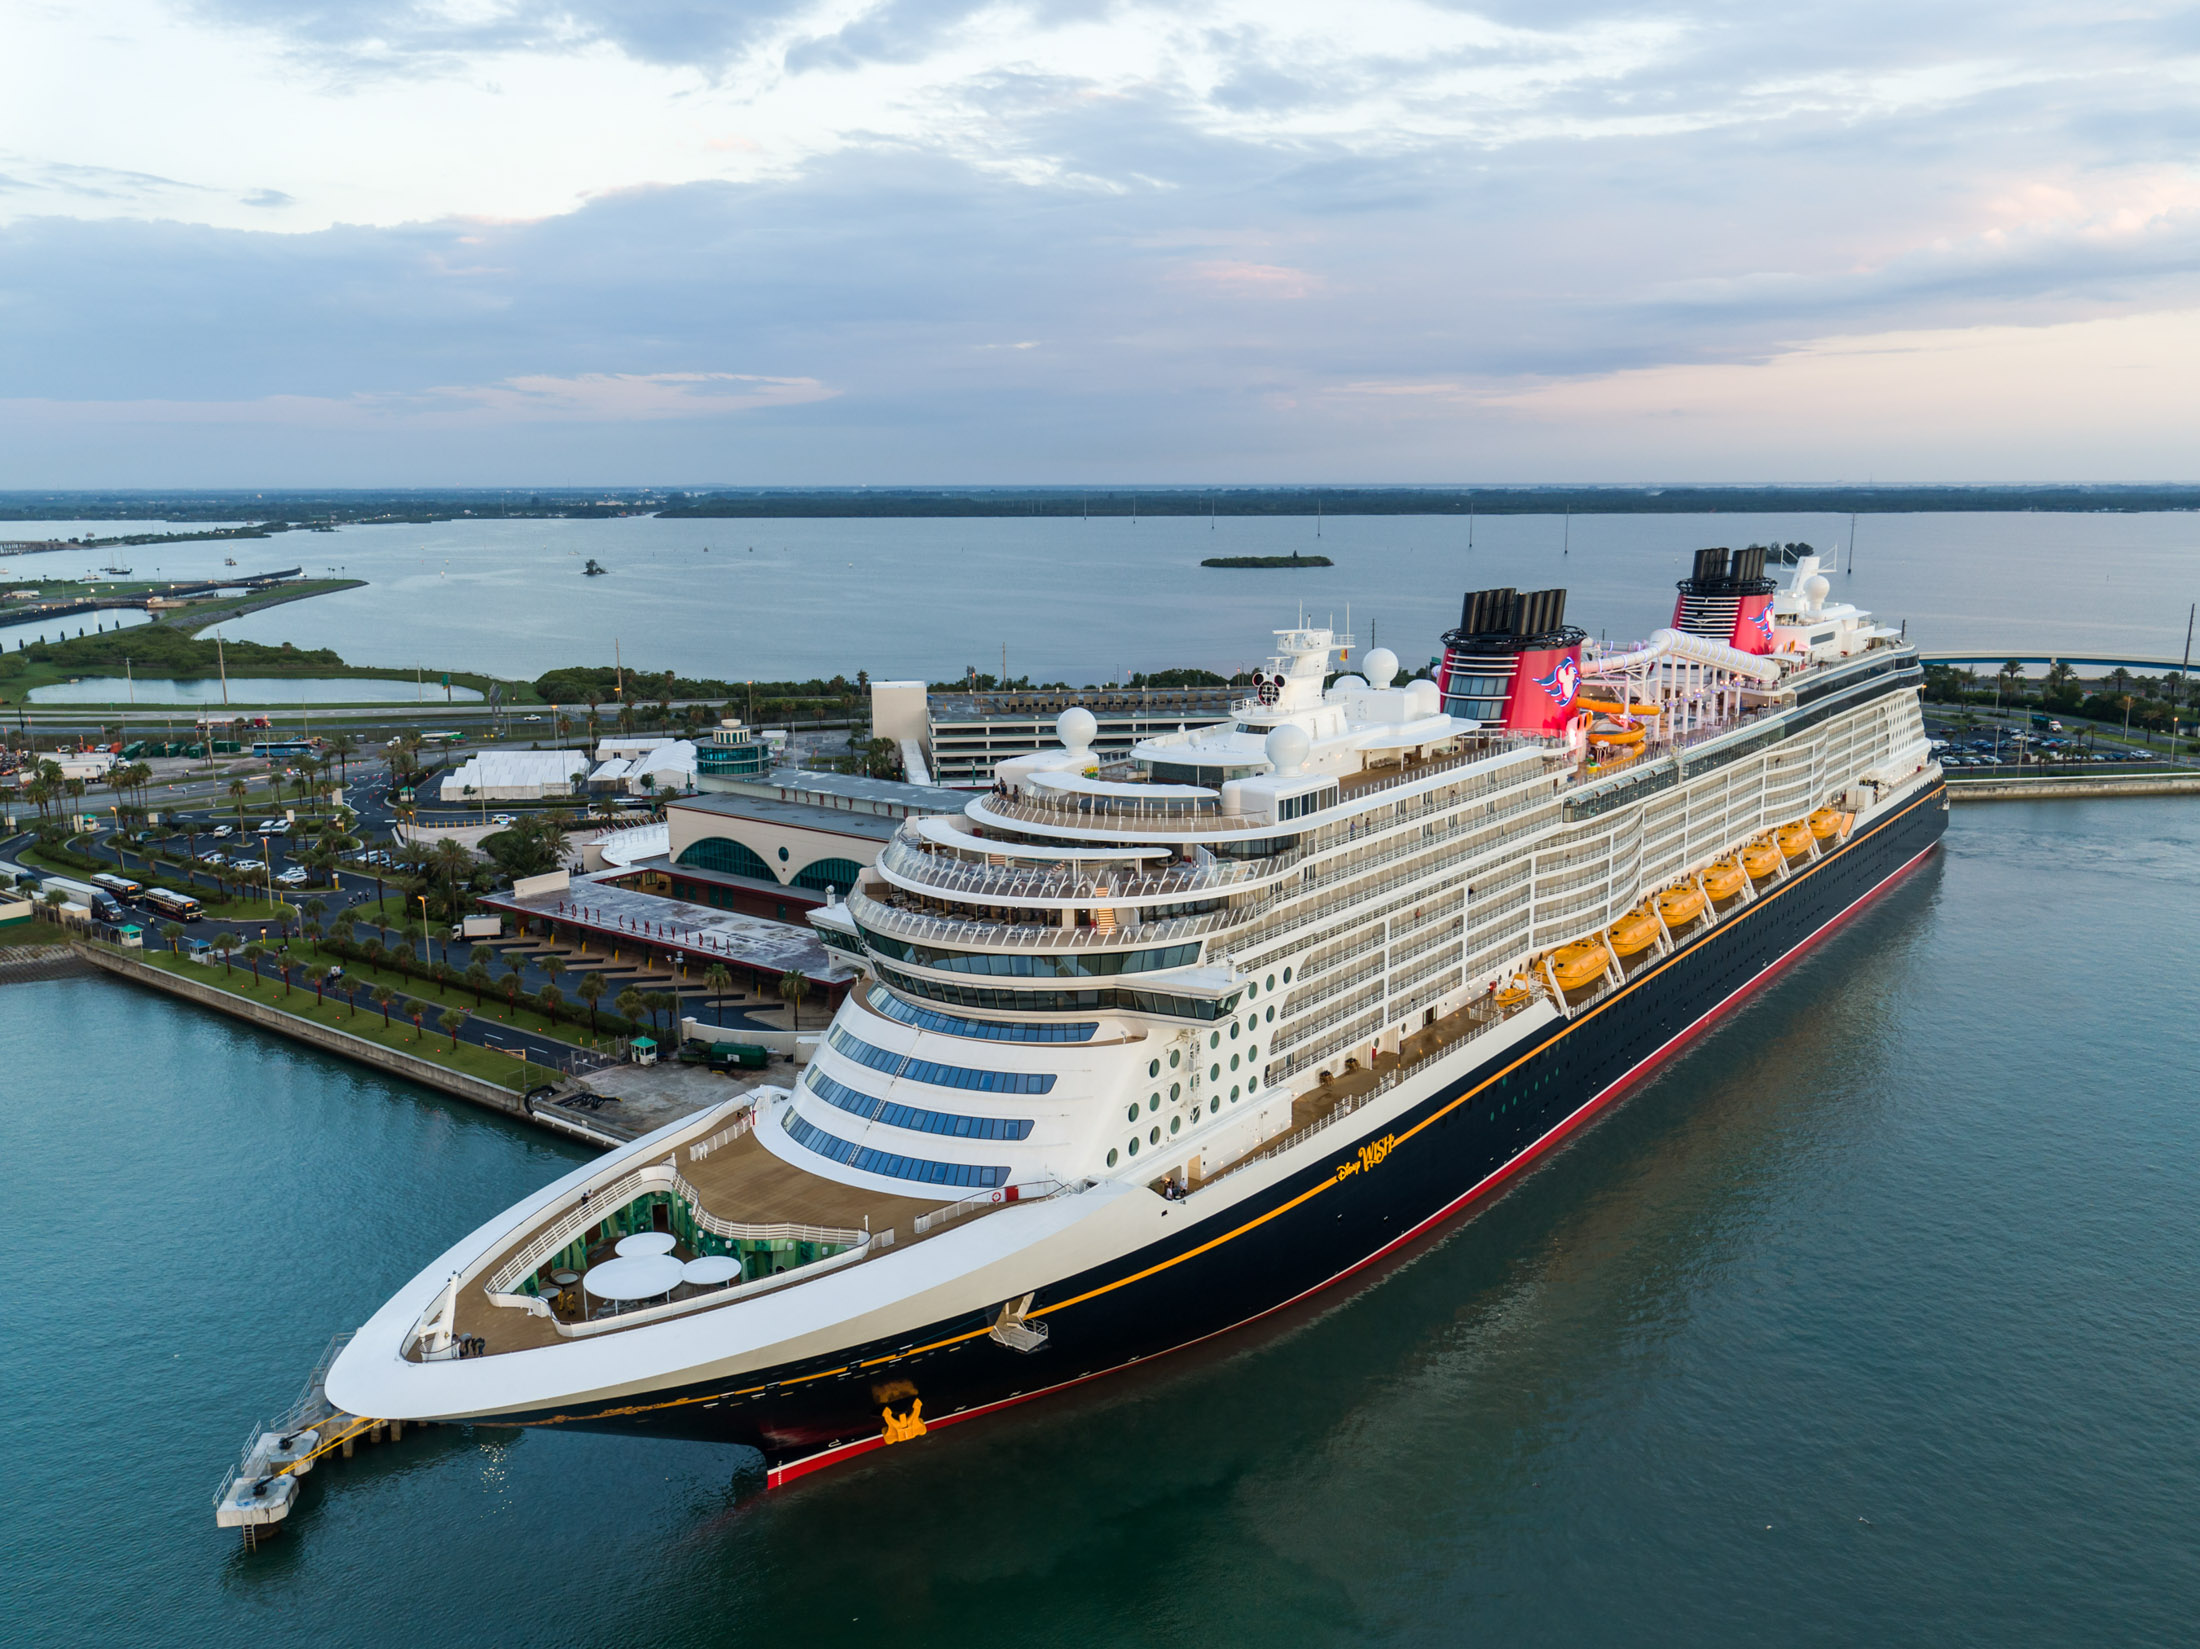 Disney Wish Cruise Ship Review Theme Park at Sea Favors Star Wars Over